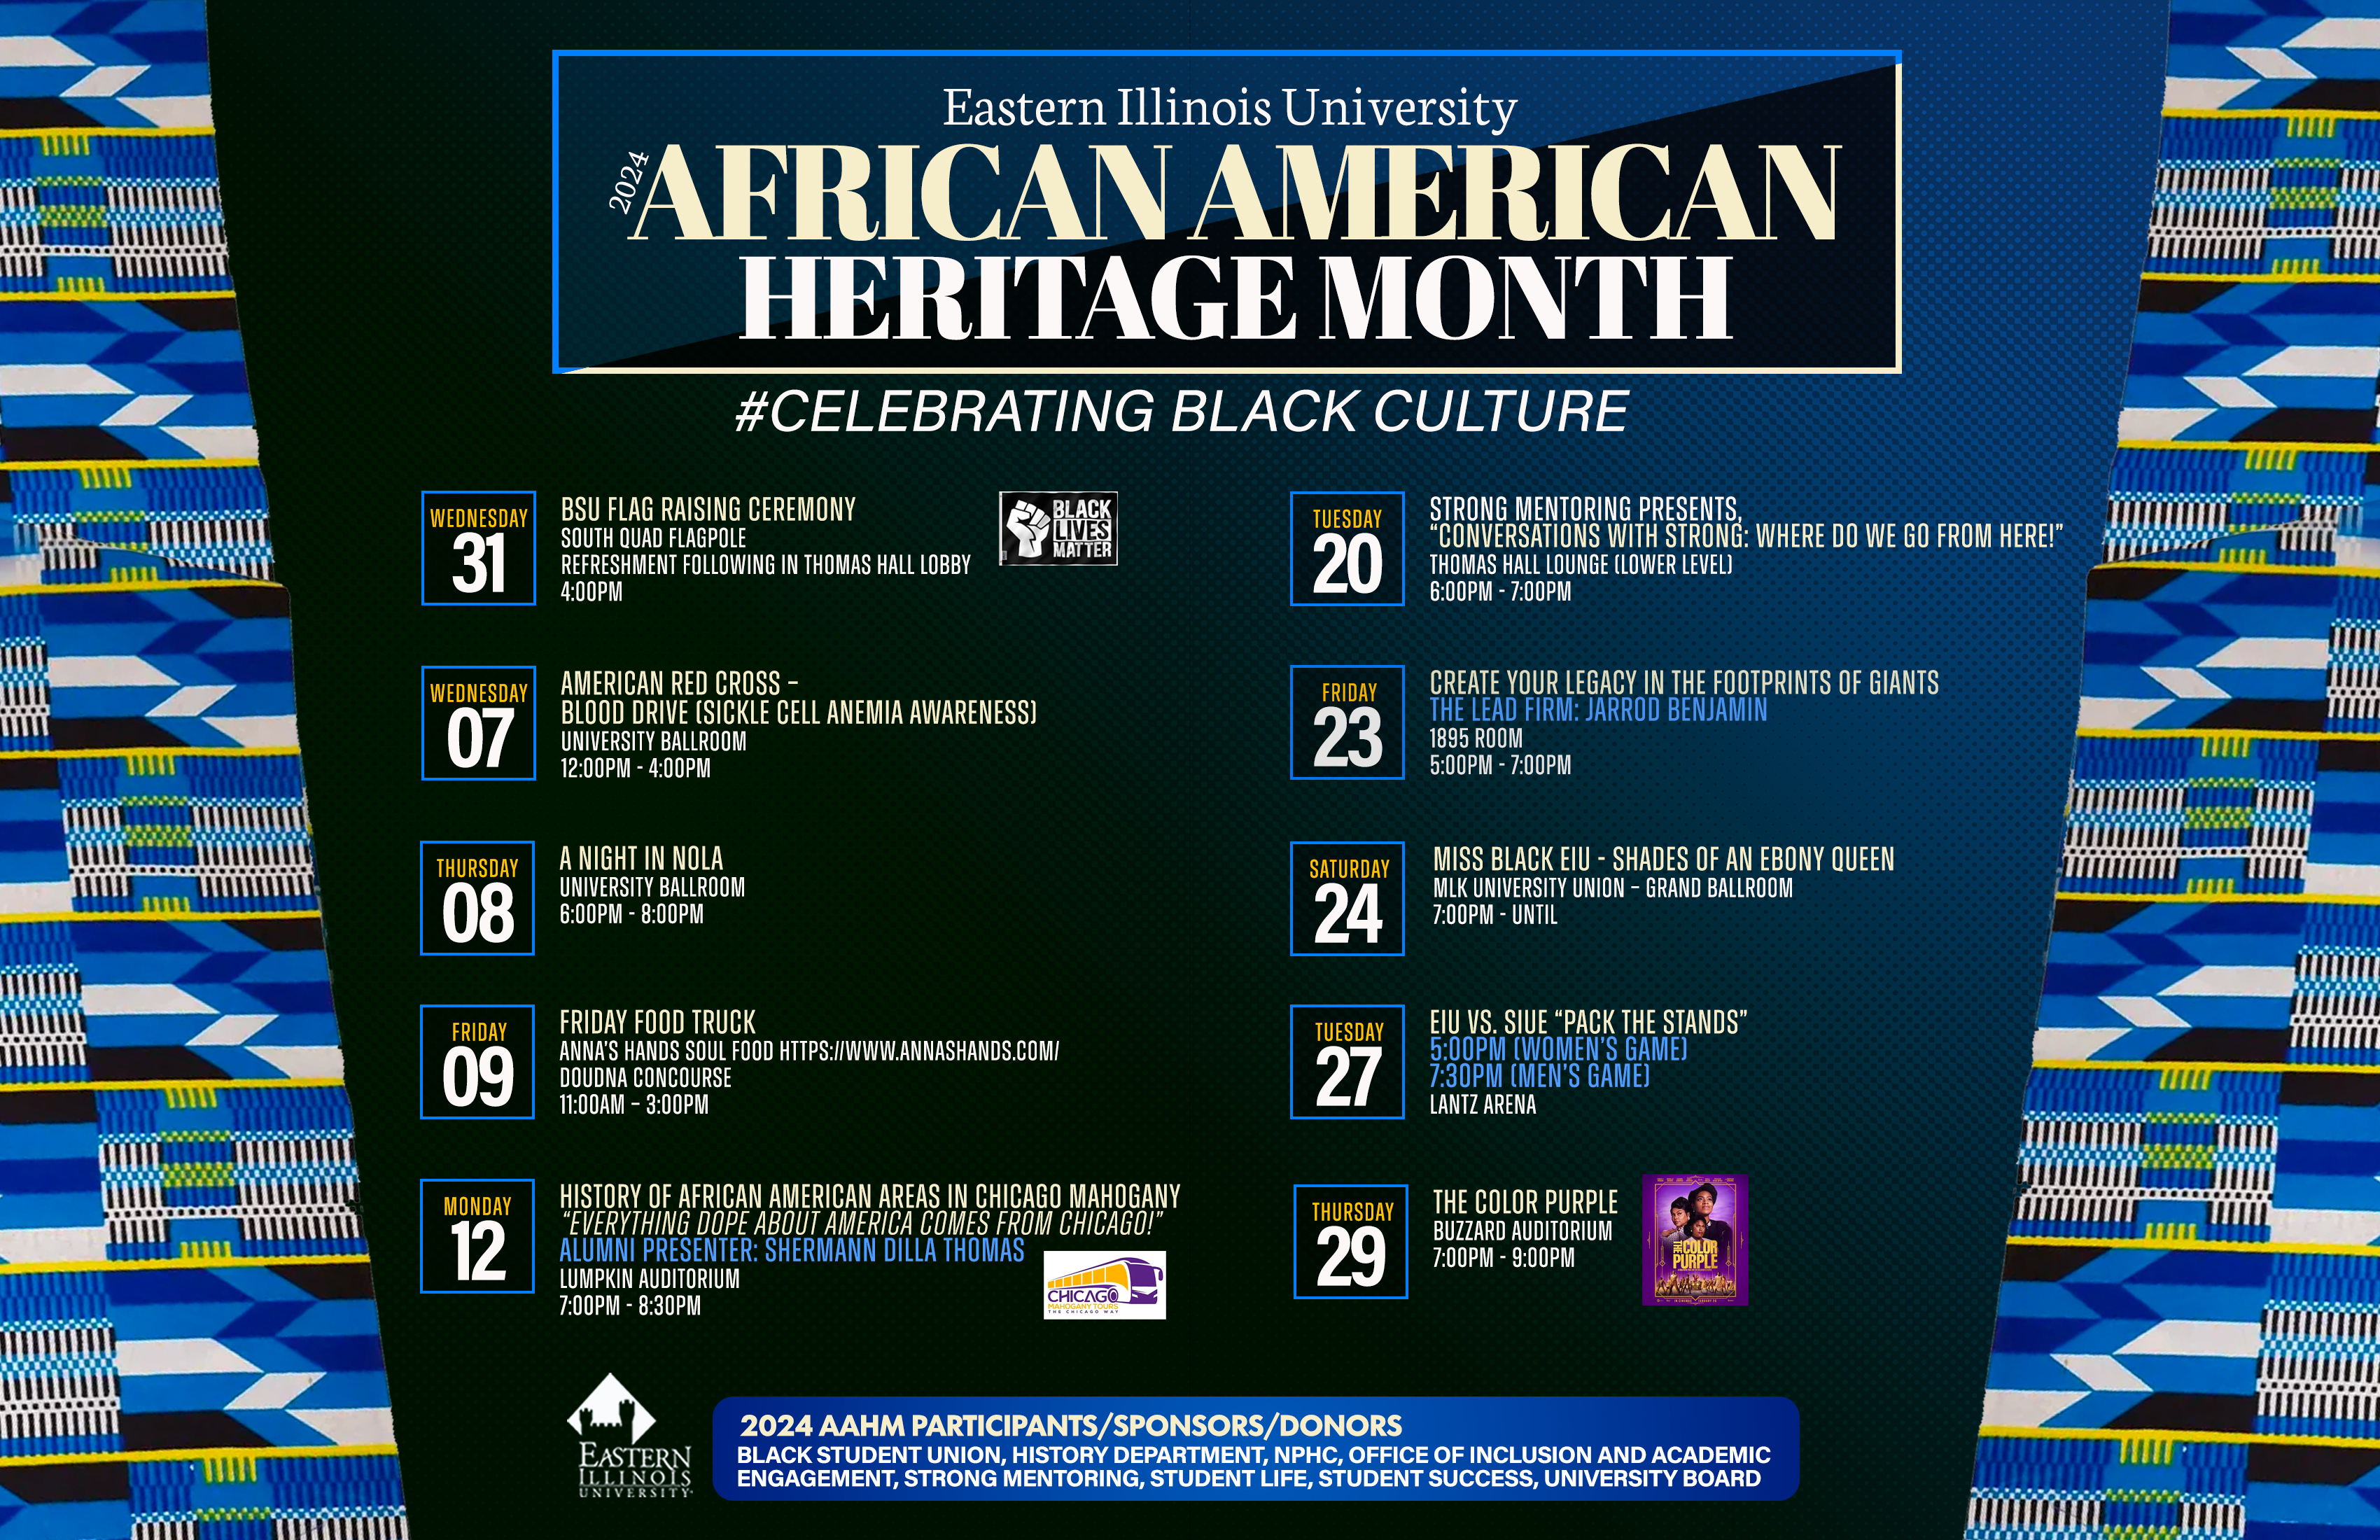 image of African American Heritage Month events